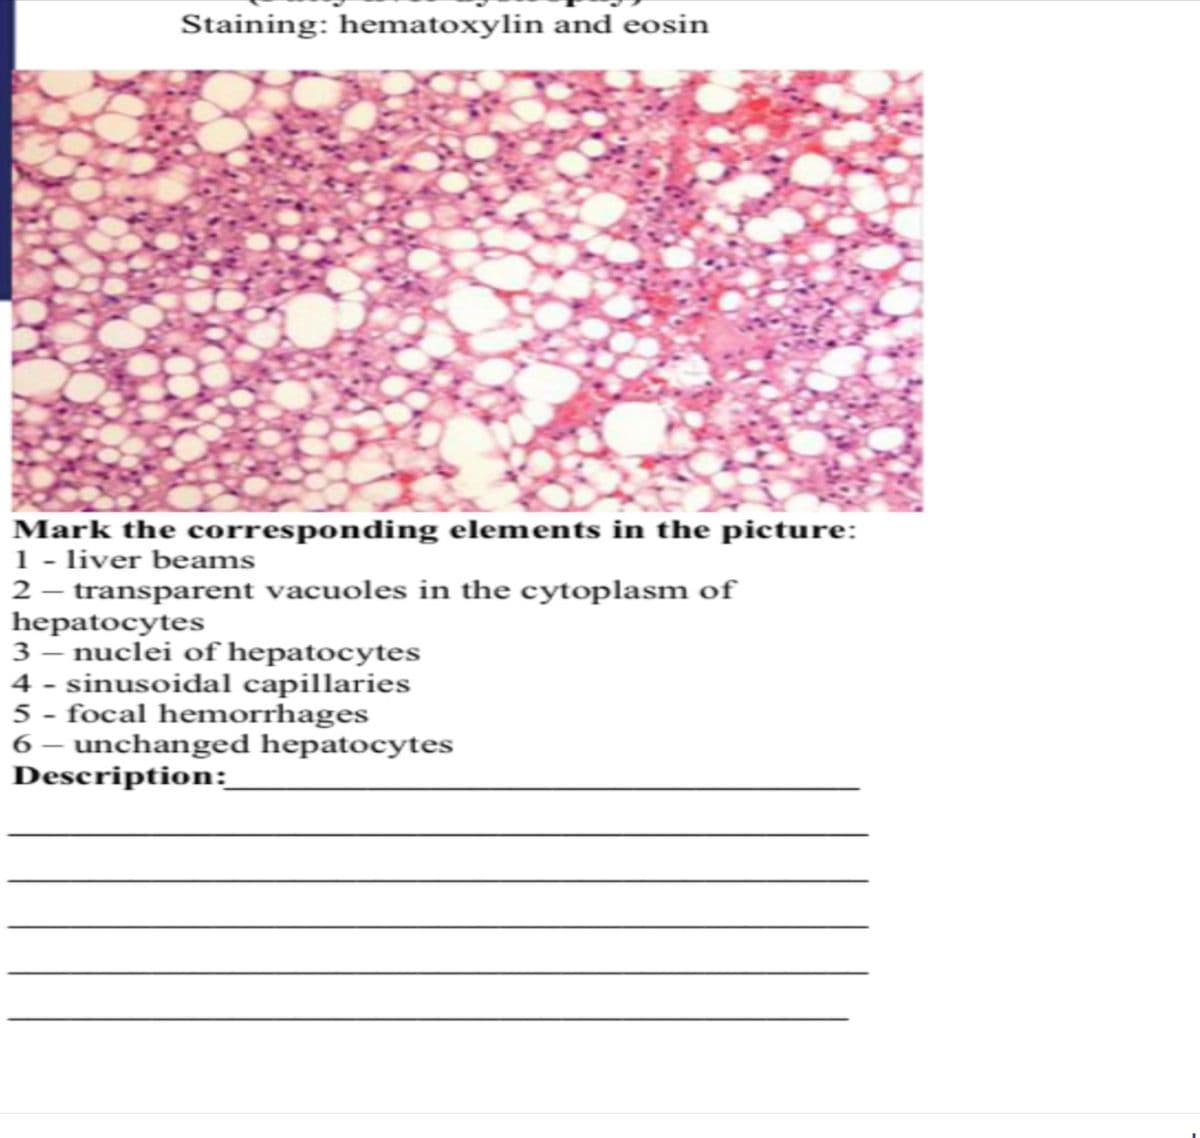 Staining: hematoxylin and eosin
Mark the corresponding elements in the picture:
1 - liver beams
2- transparent vacuoles in the cytoplasm of
hepatocytes
3- nuclei of hepatocytes
4-sinusoidal capillaries
5 - focal hemorrhages
6 - unchanged hepatocytes
Description: